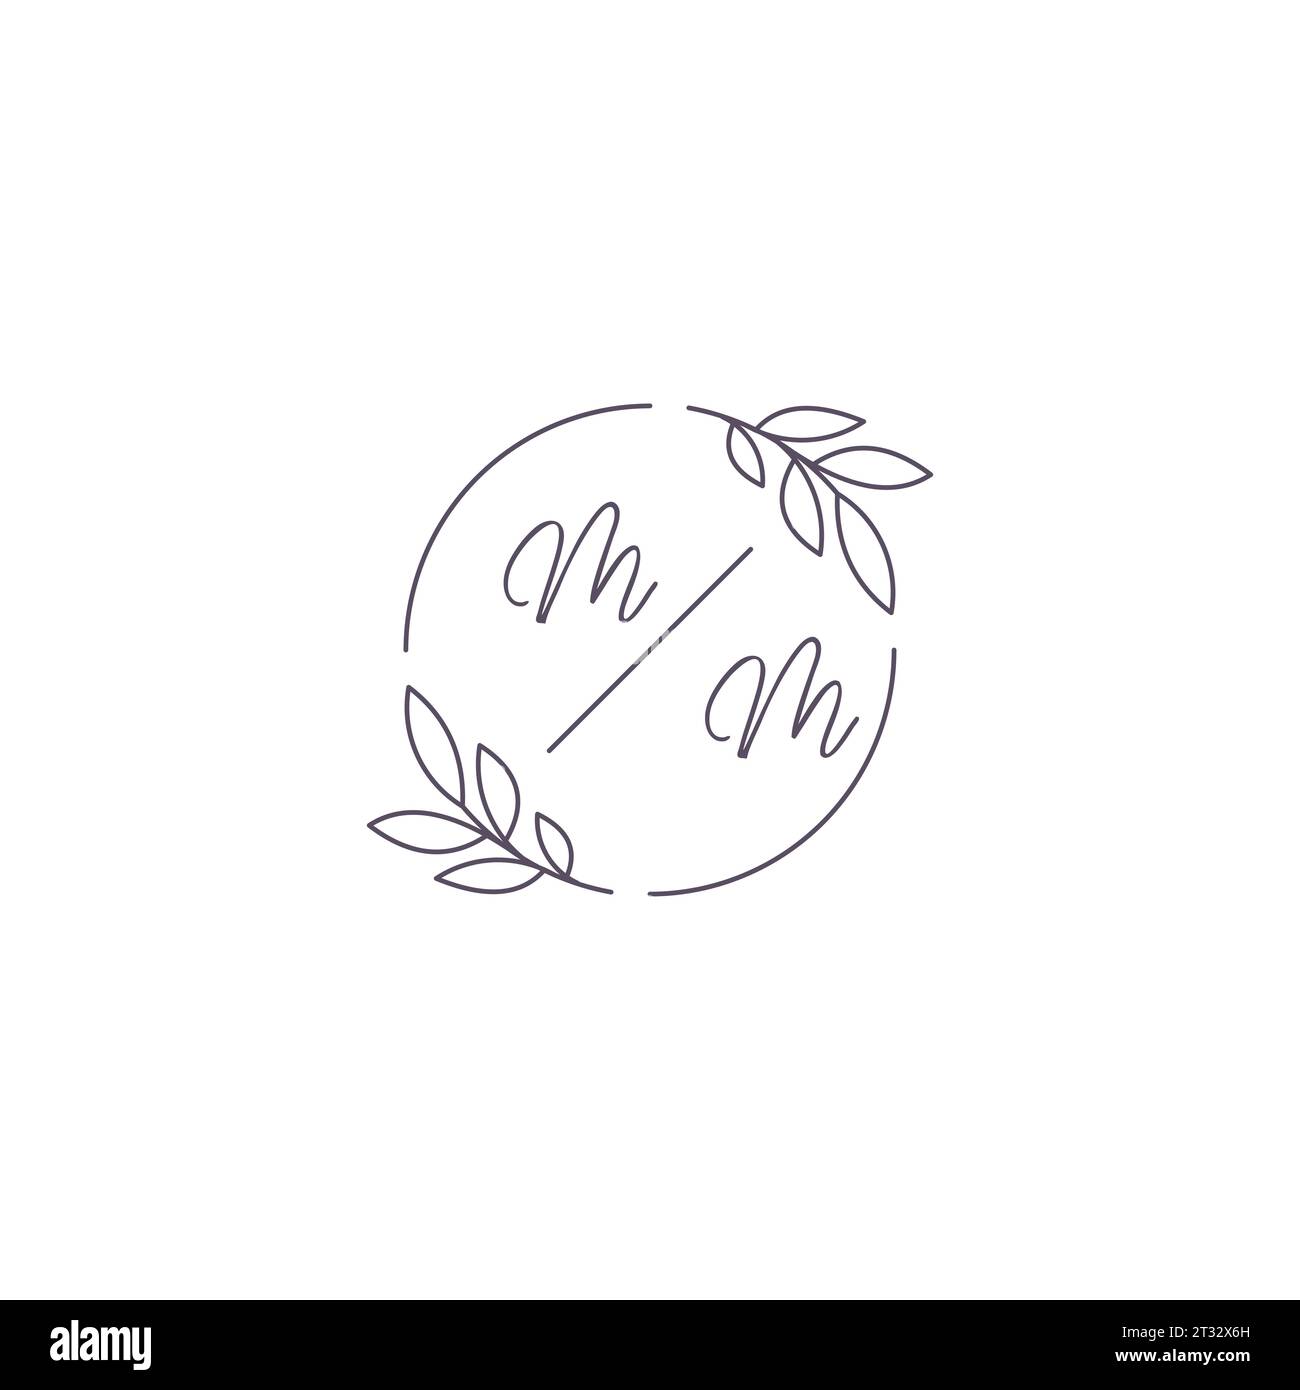 Mm monogram logo with circle outline design Vector Image